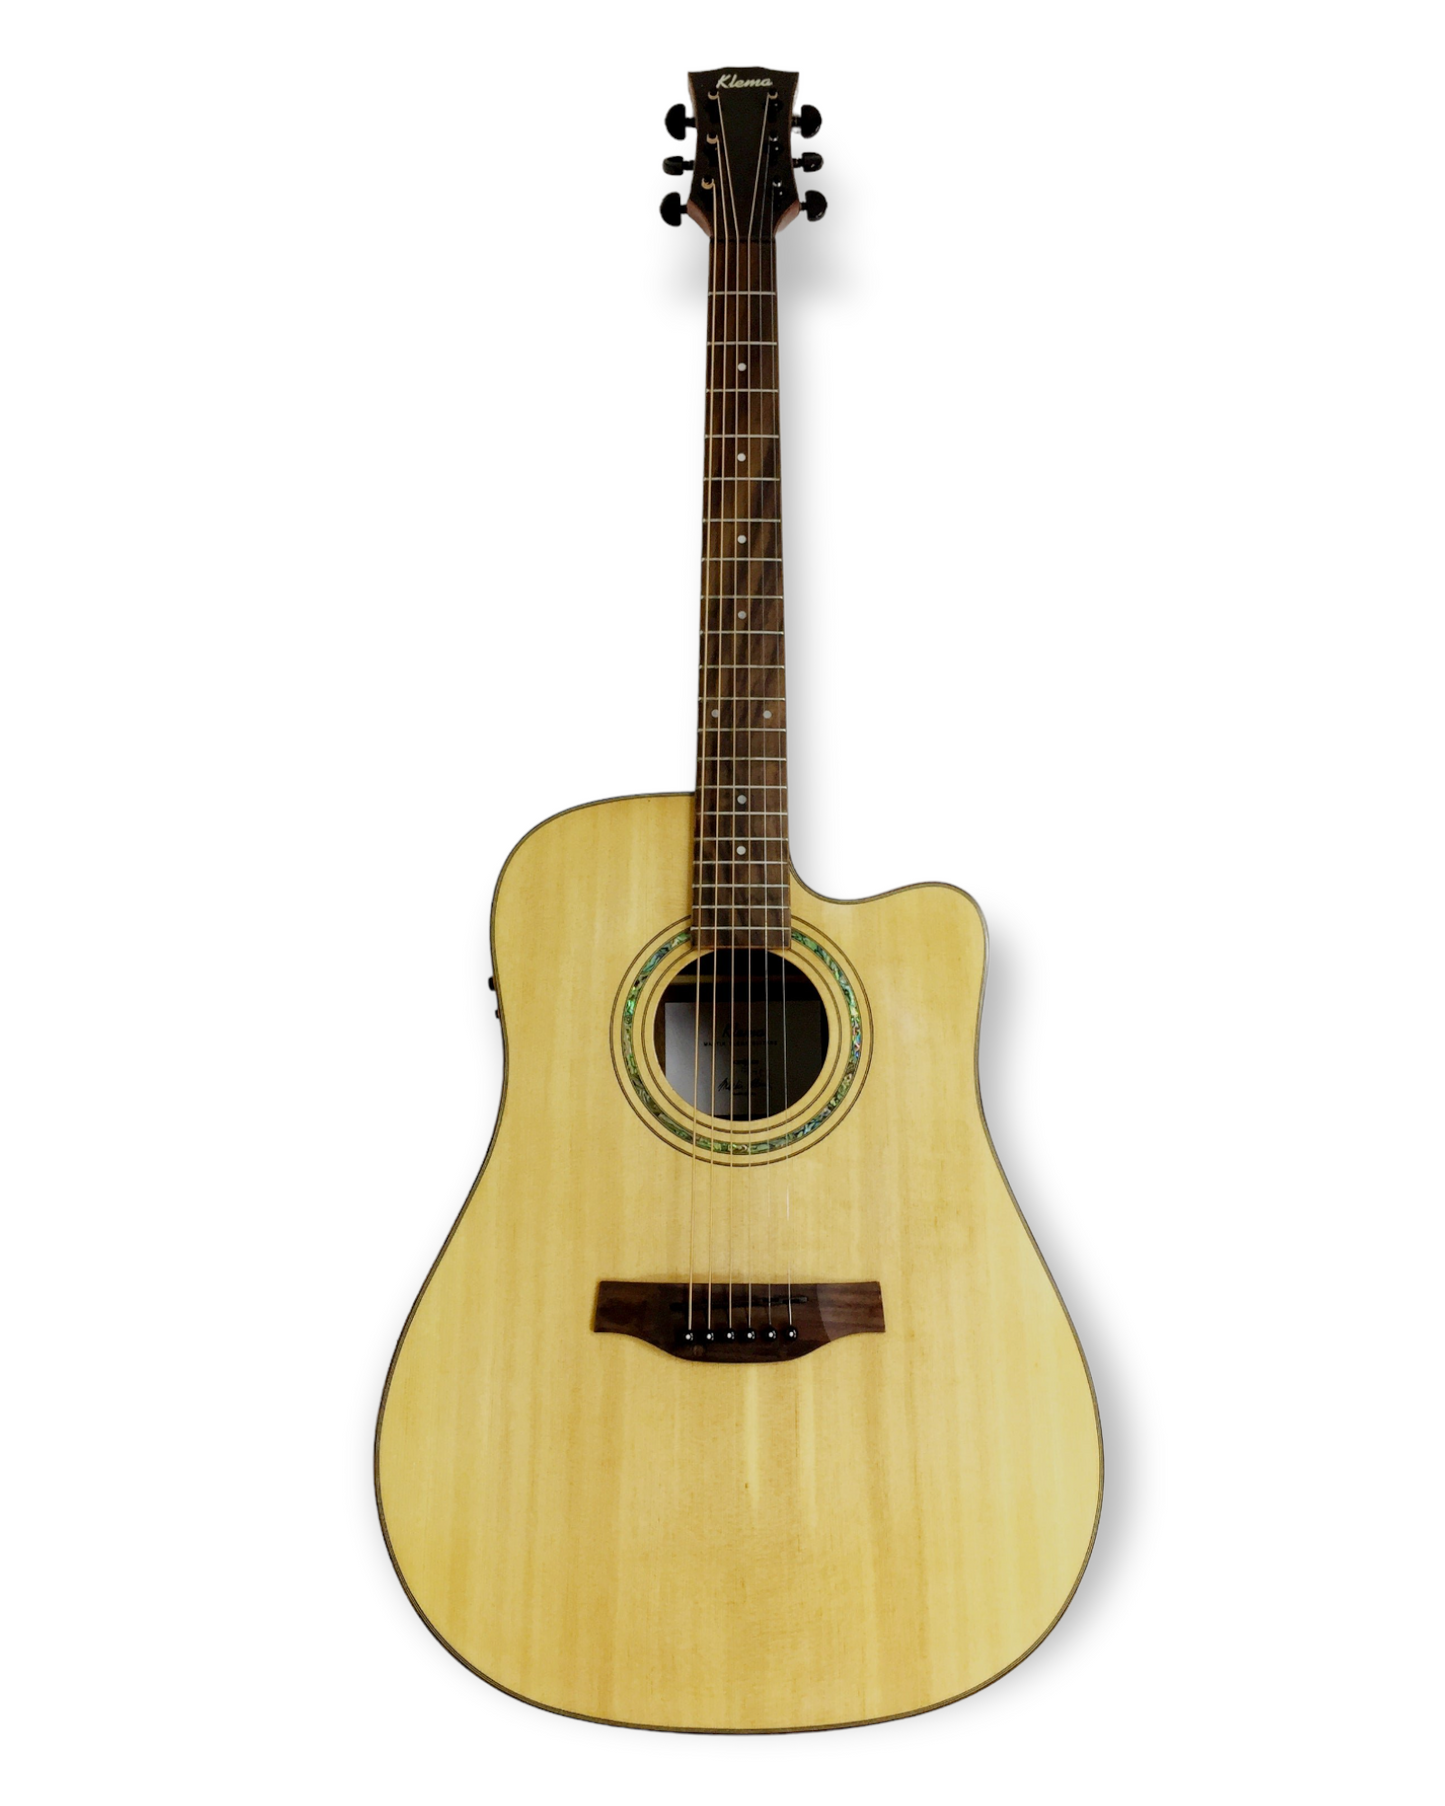 Klema Solid Spruce Top Indian Rosewood Body Fishman Pickup/Tuner Acoustic Guitar - Natural K300JSCE